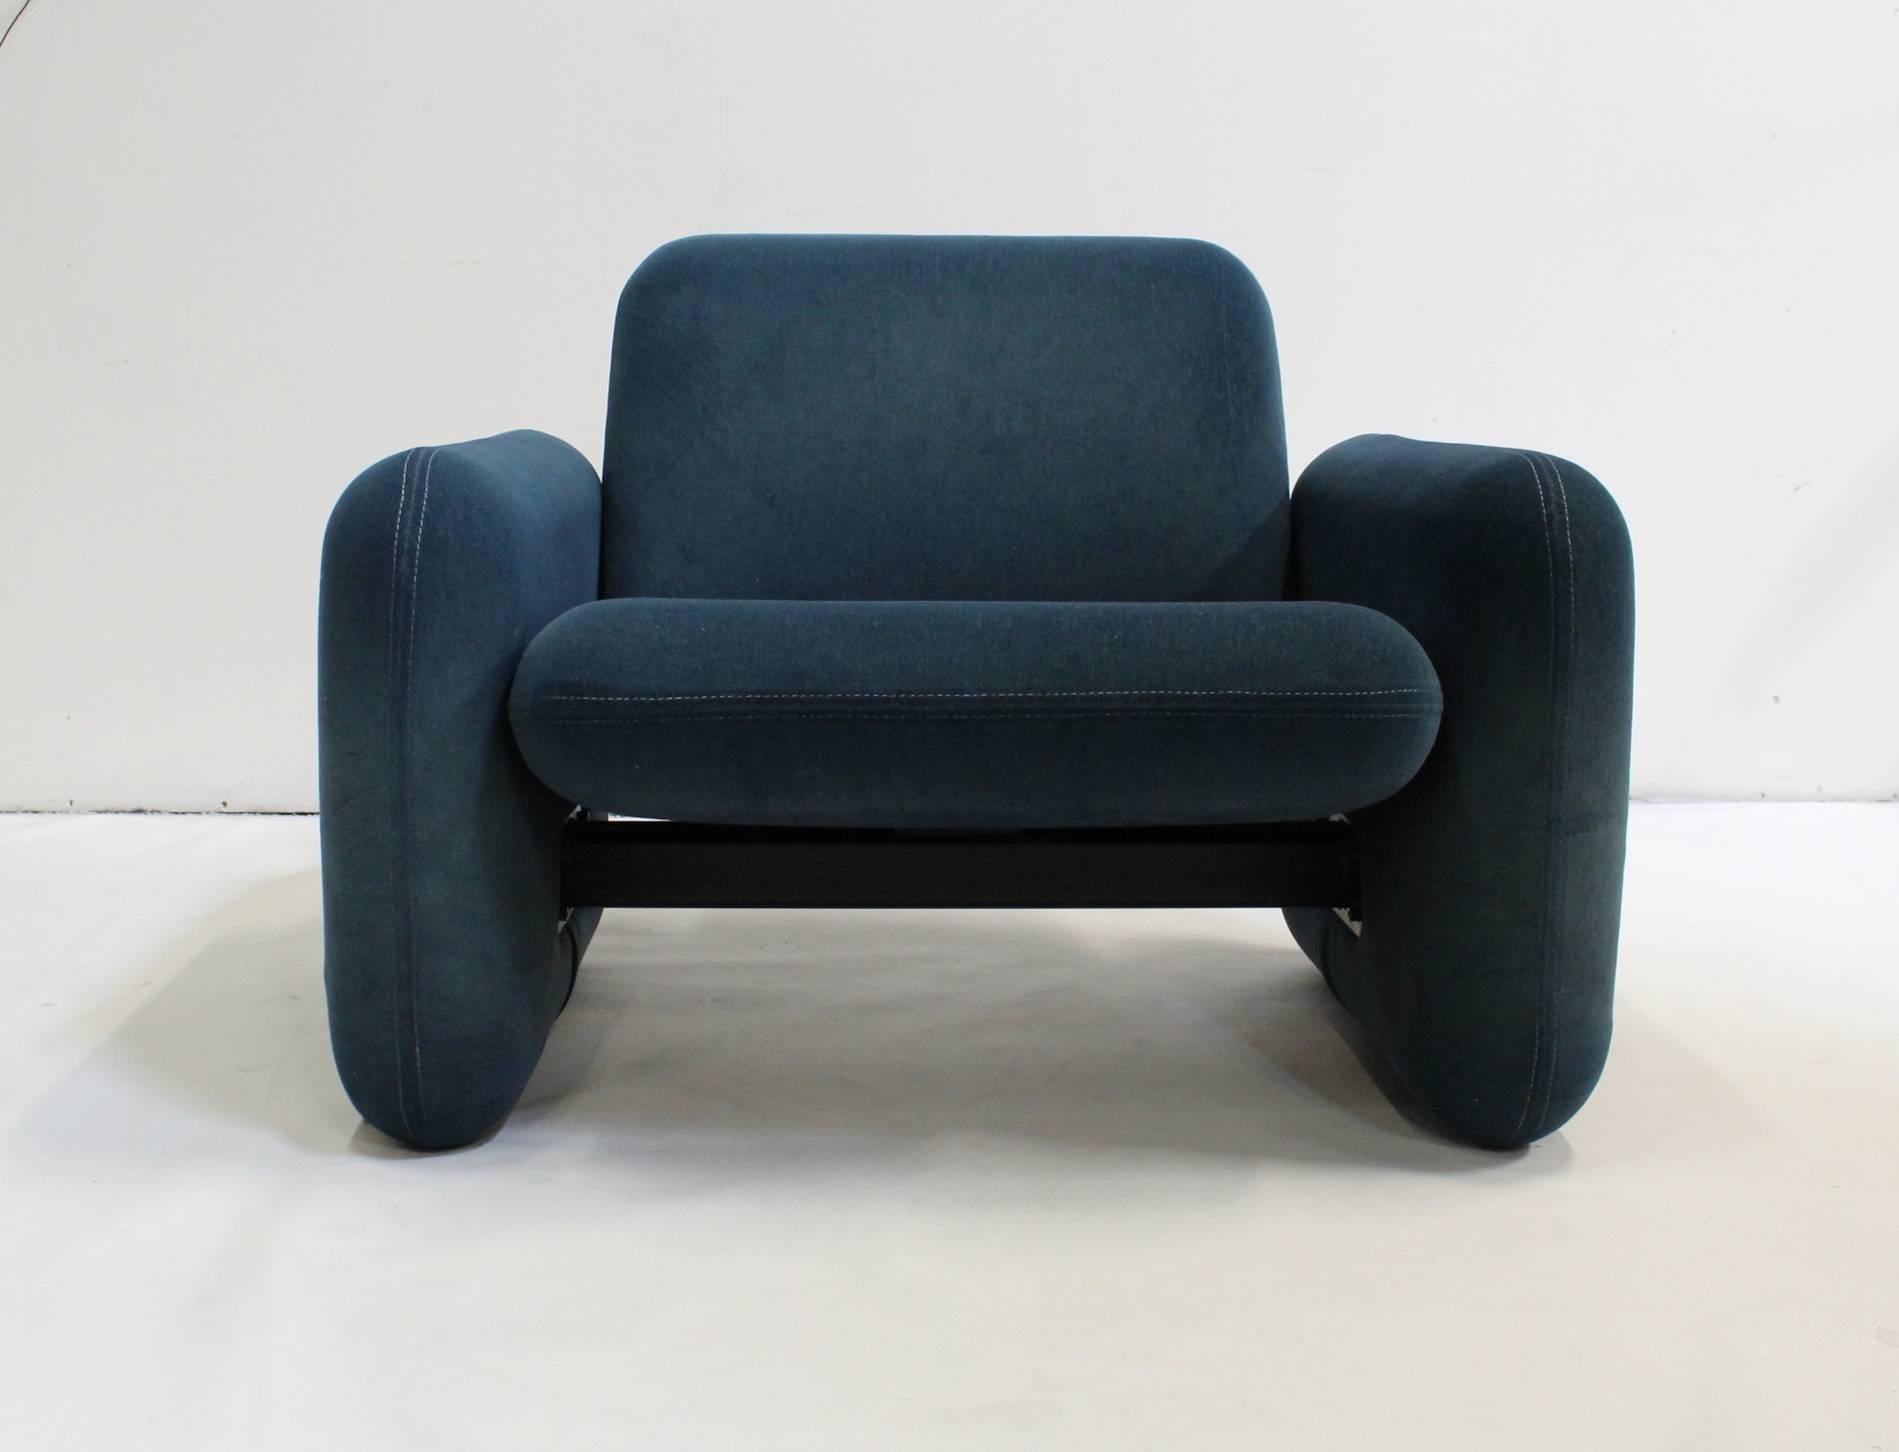 ray wilkes chiclet chair